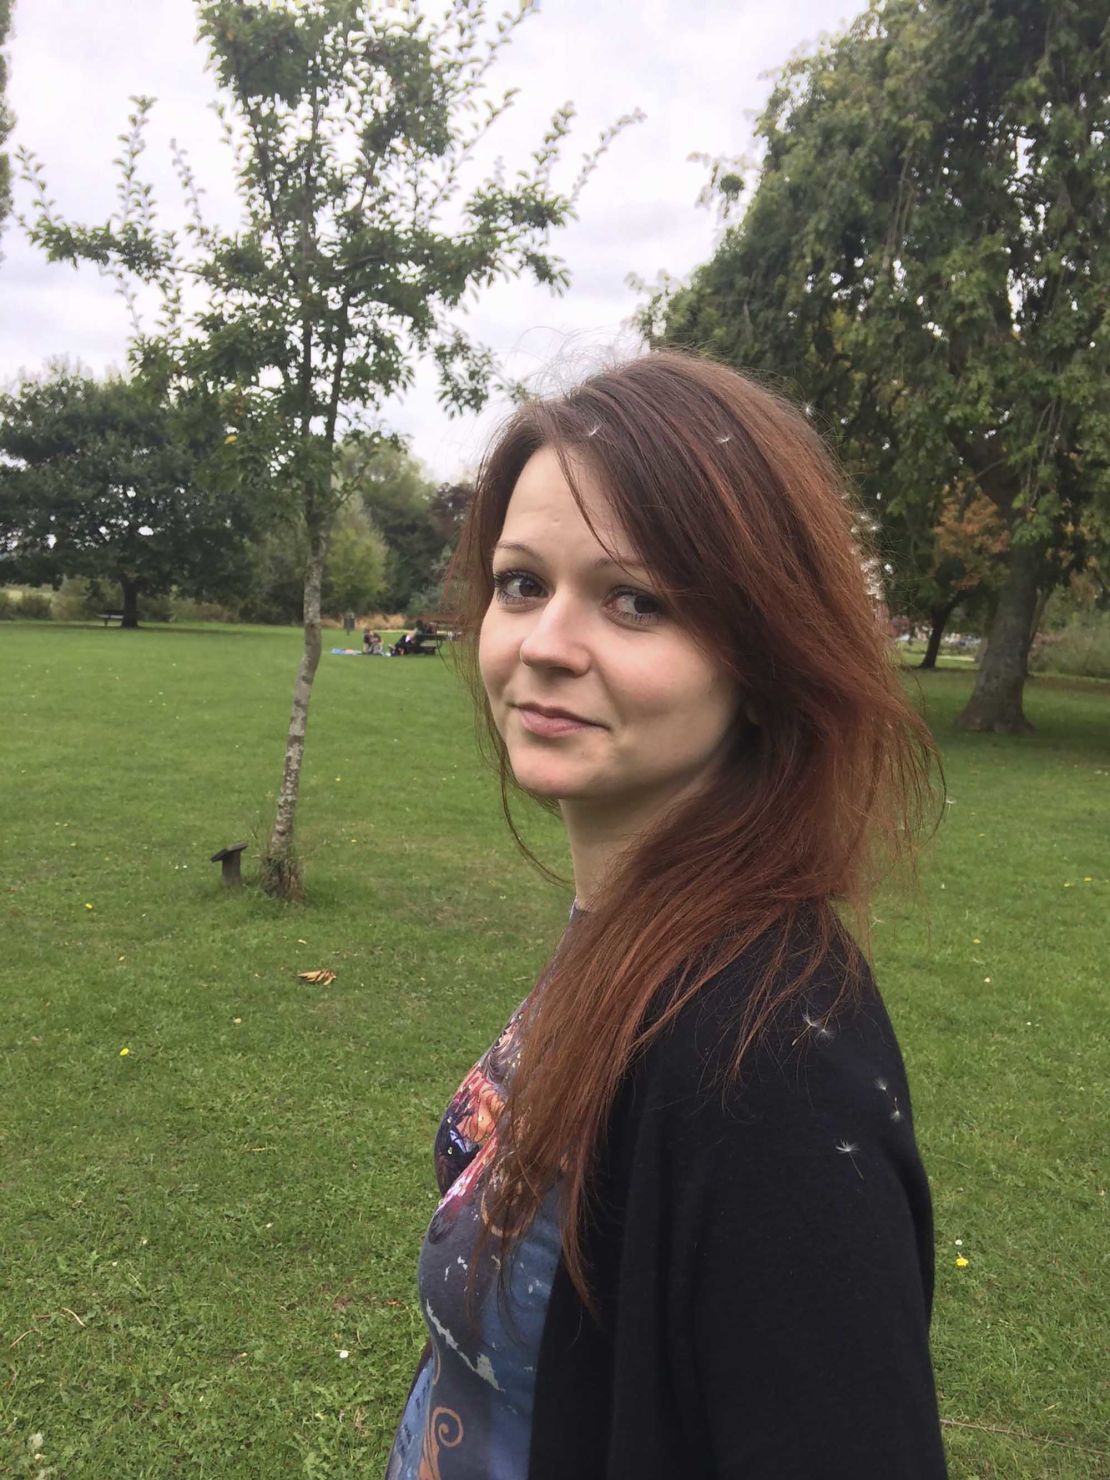 Yulia Skripal in an image taken from her Facebook account on Tuesday March 6, 2018